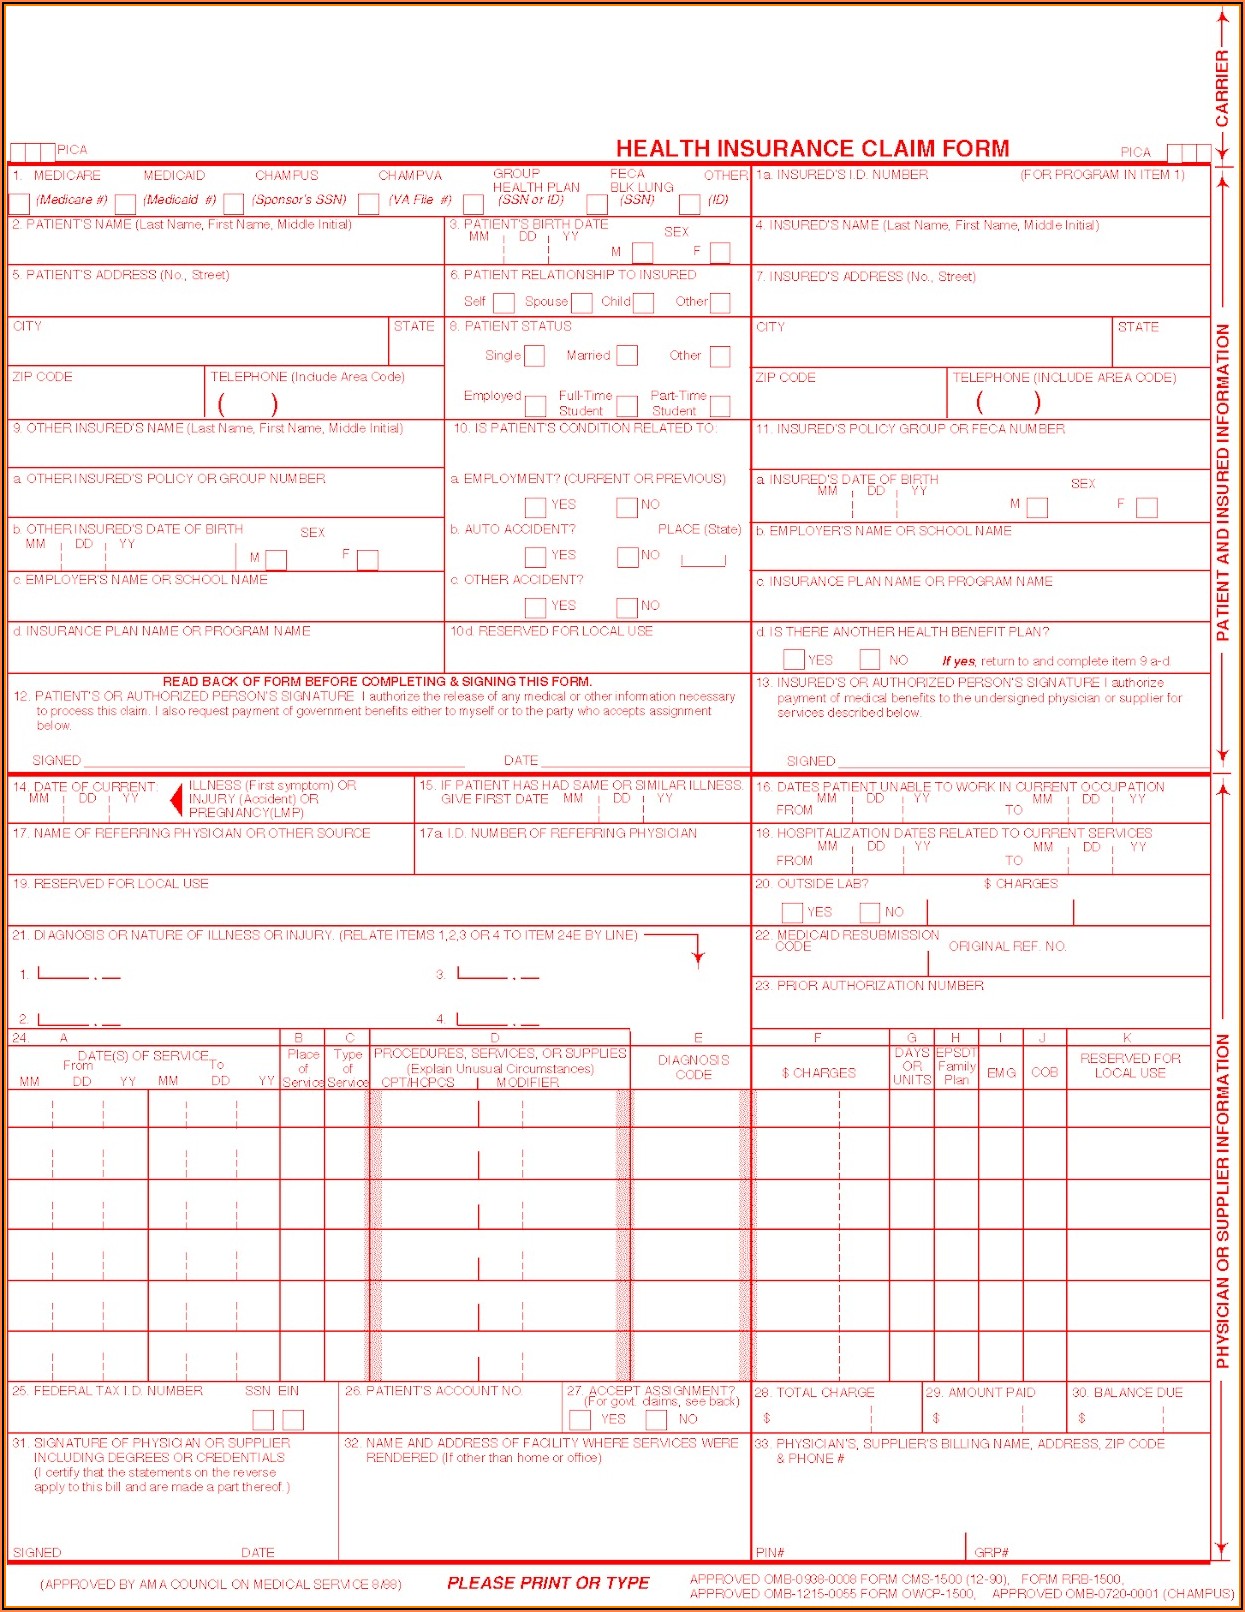 Health Insurance Claim Form 1500 Fillable Free